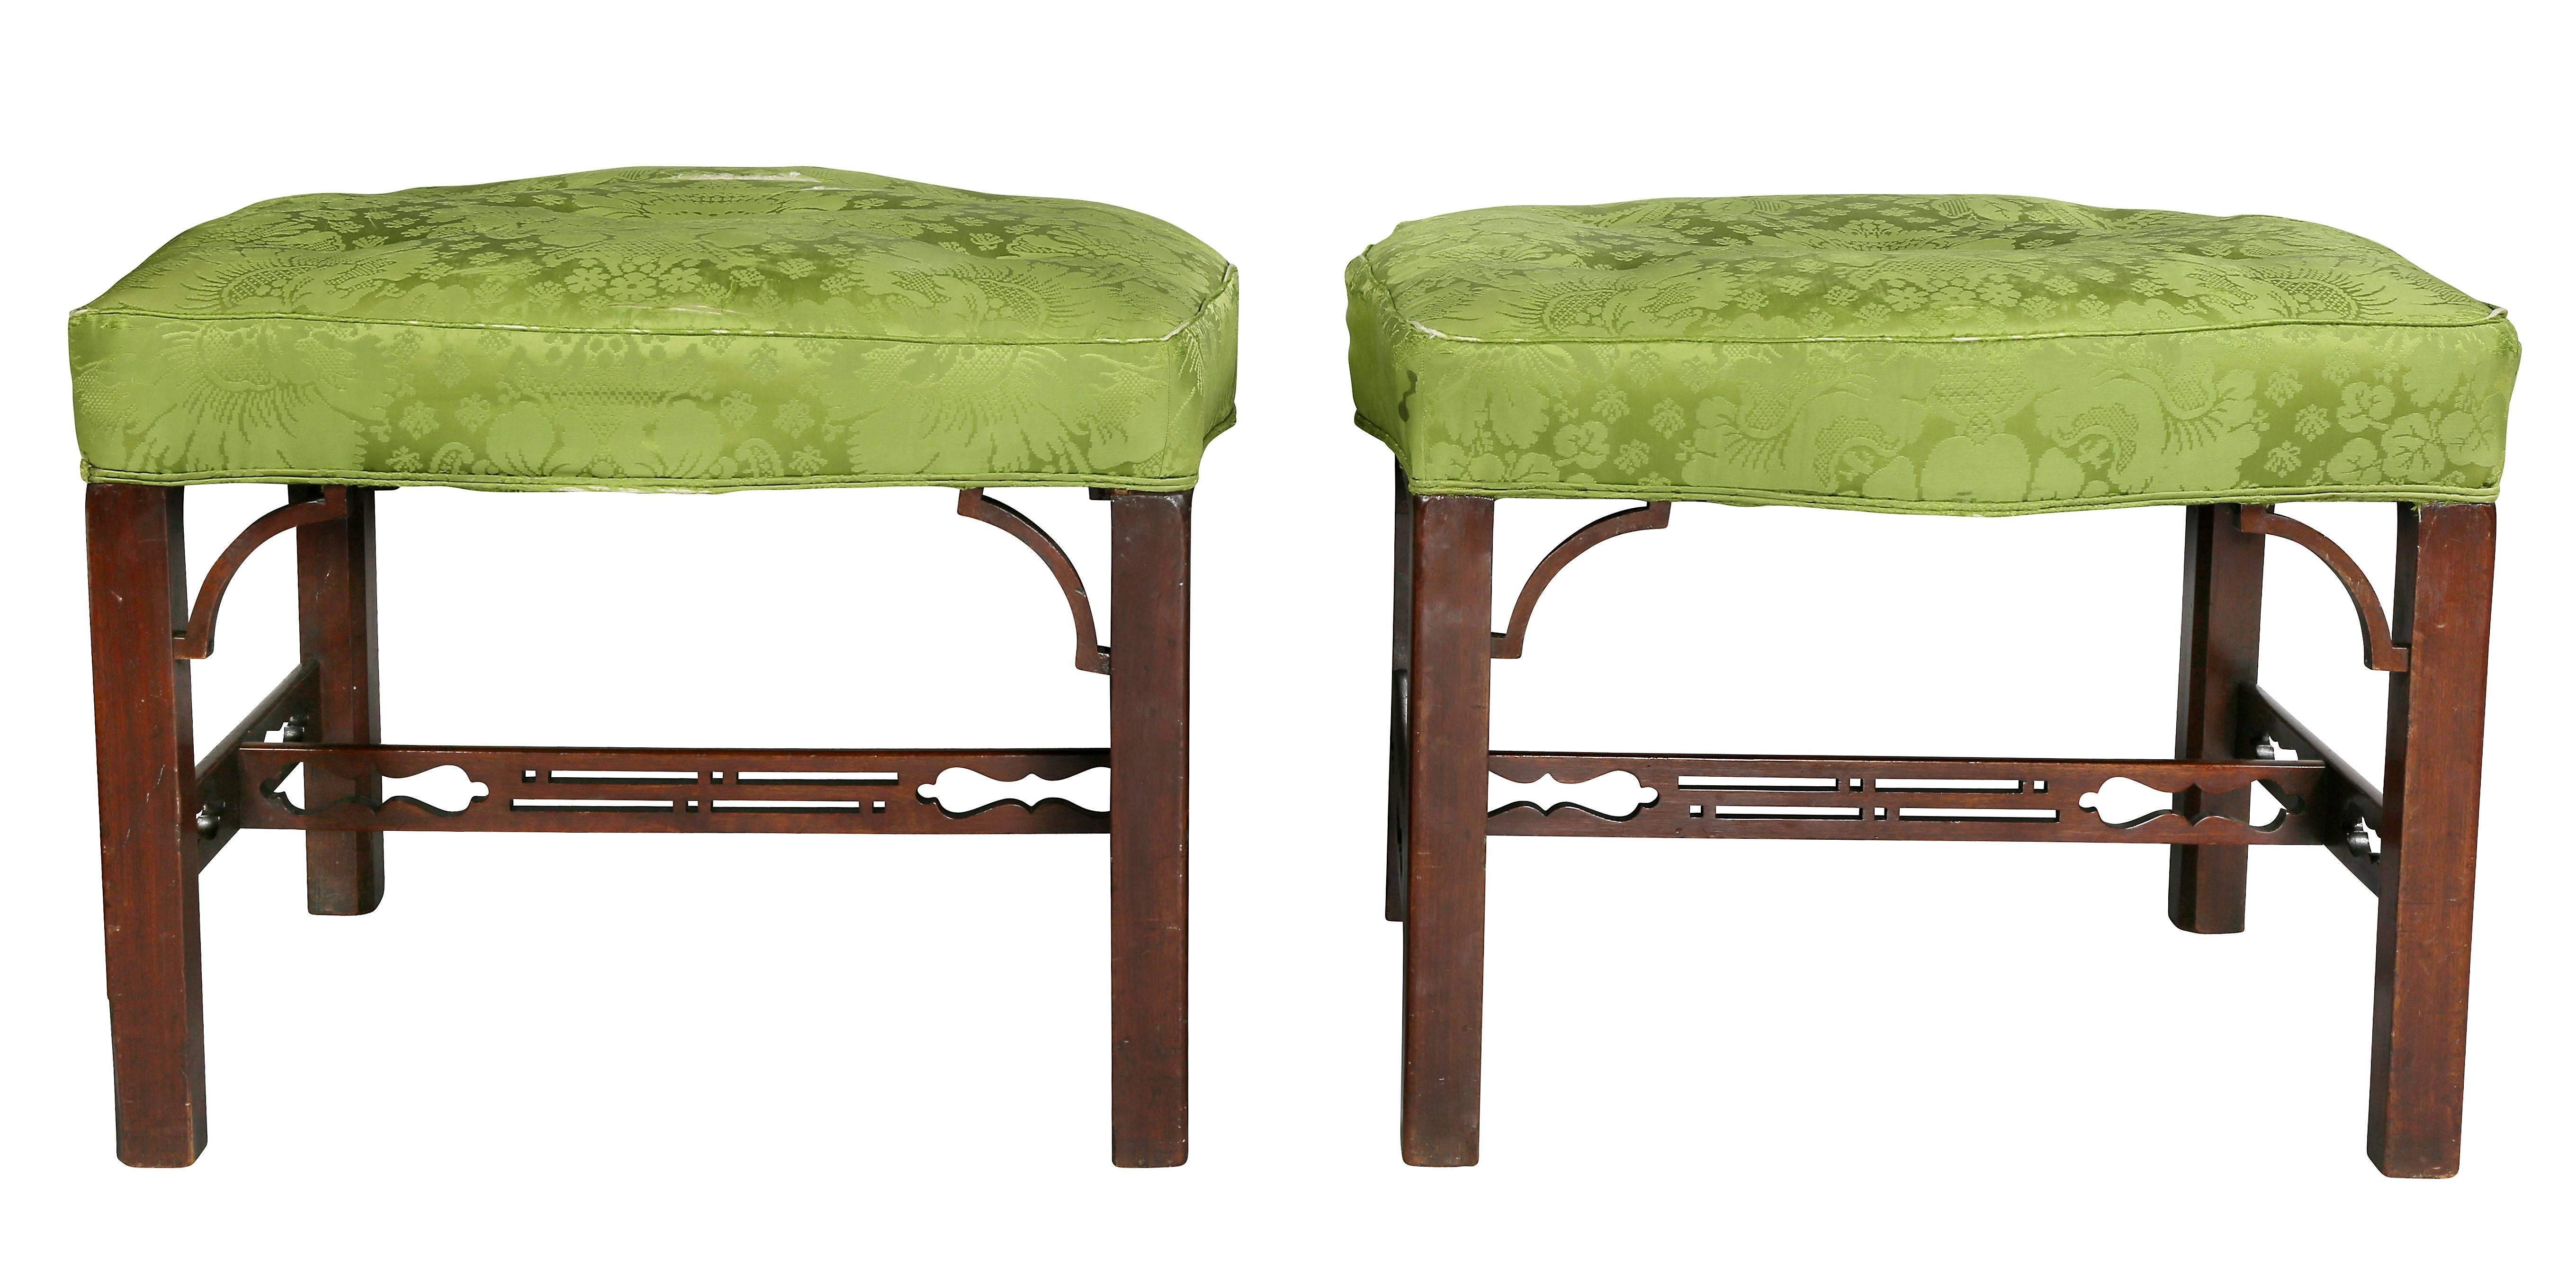 Each with upholstered seats and square legs with bracket corners and joined by pierced stretchers.